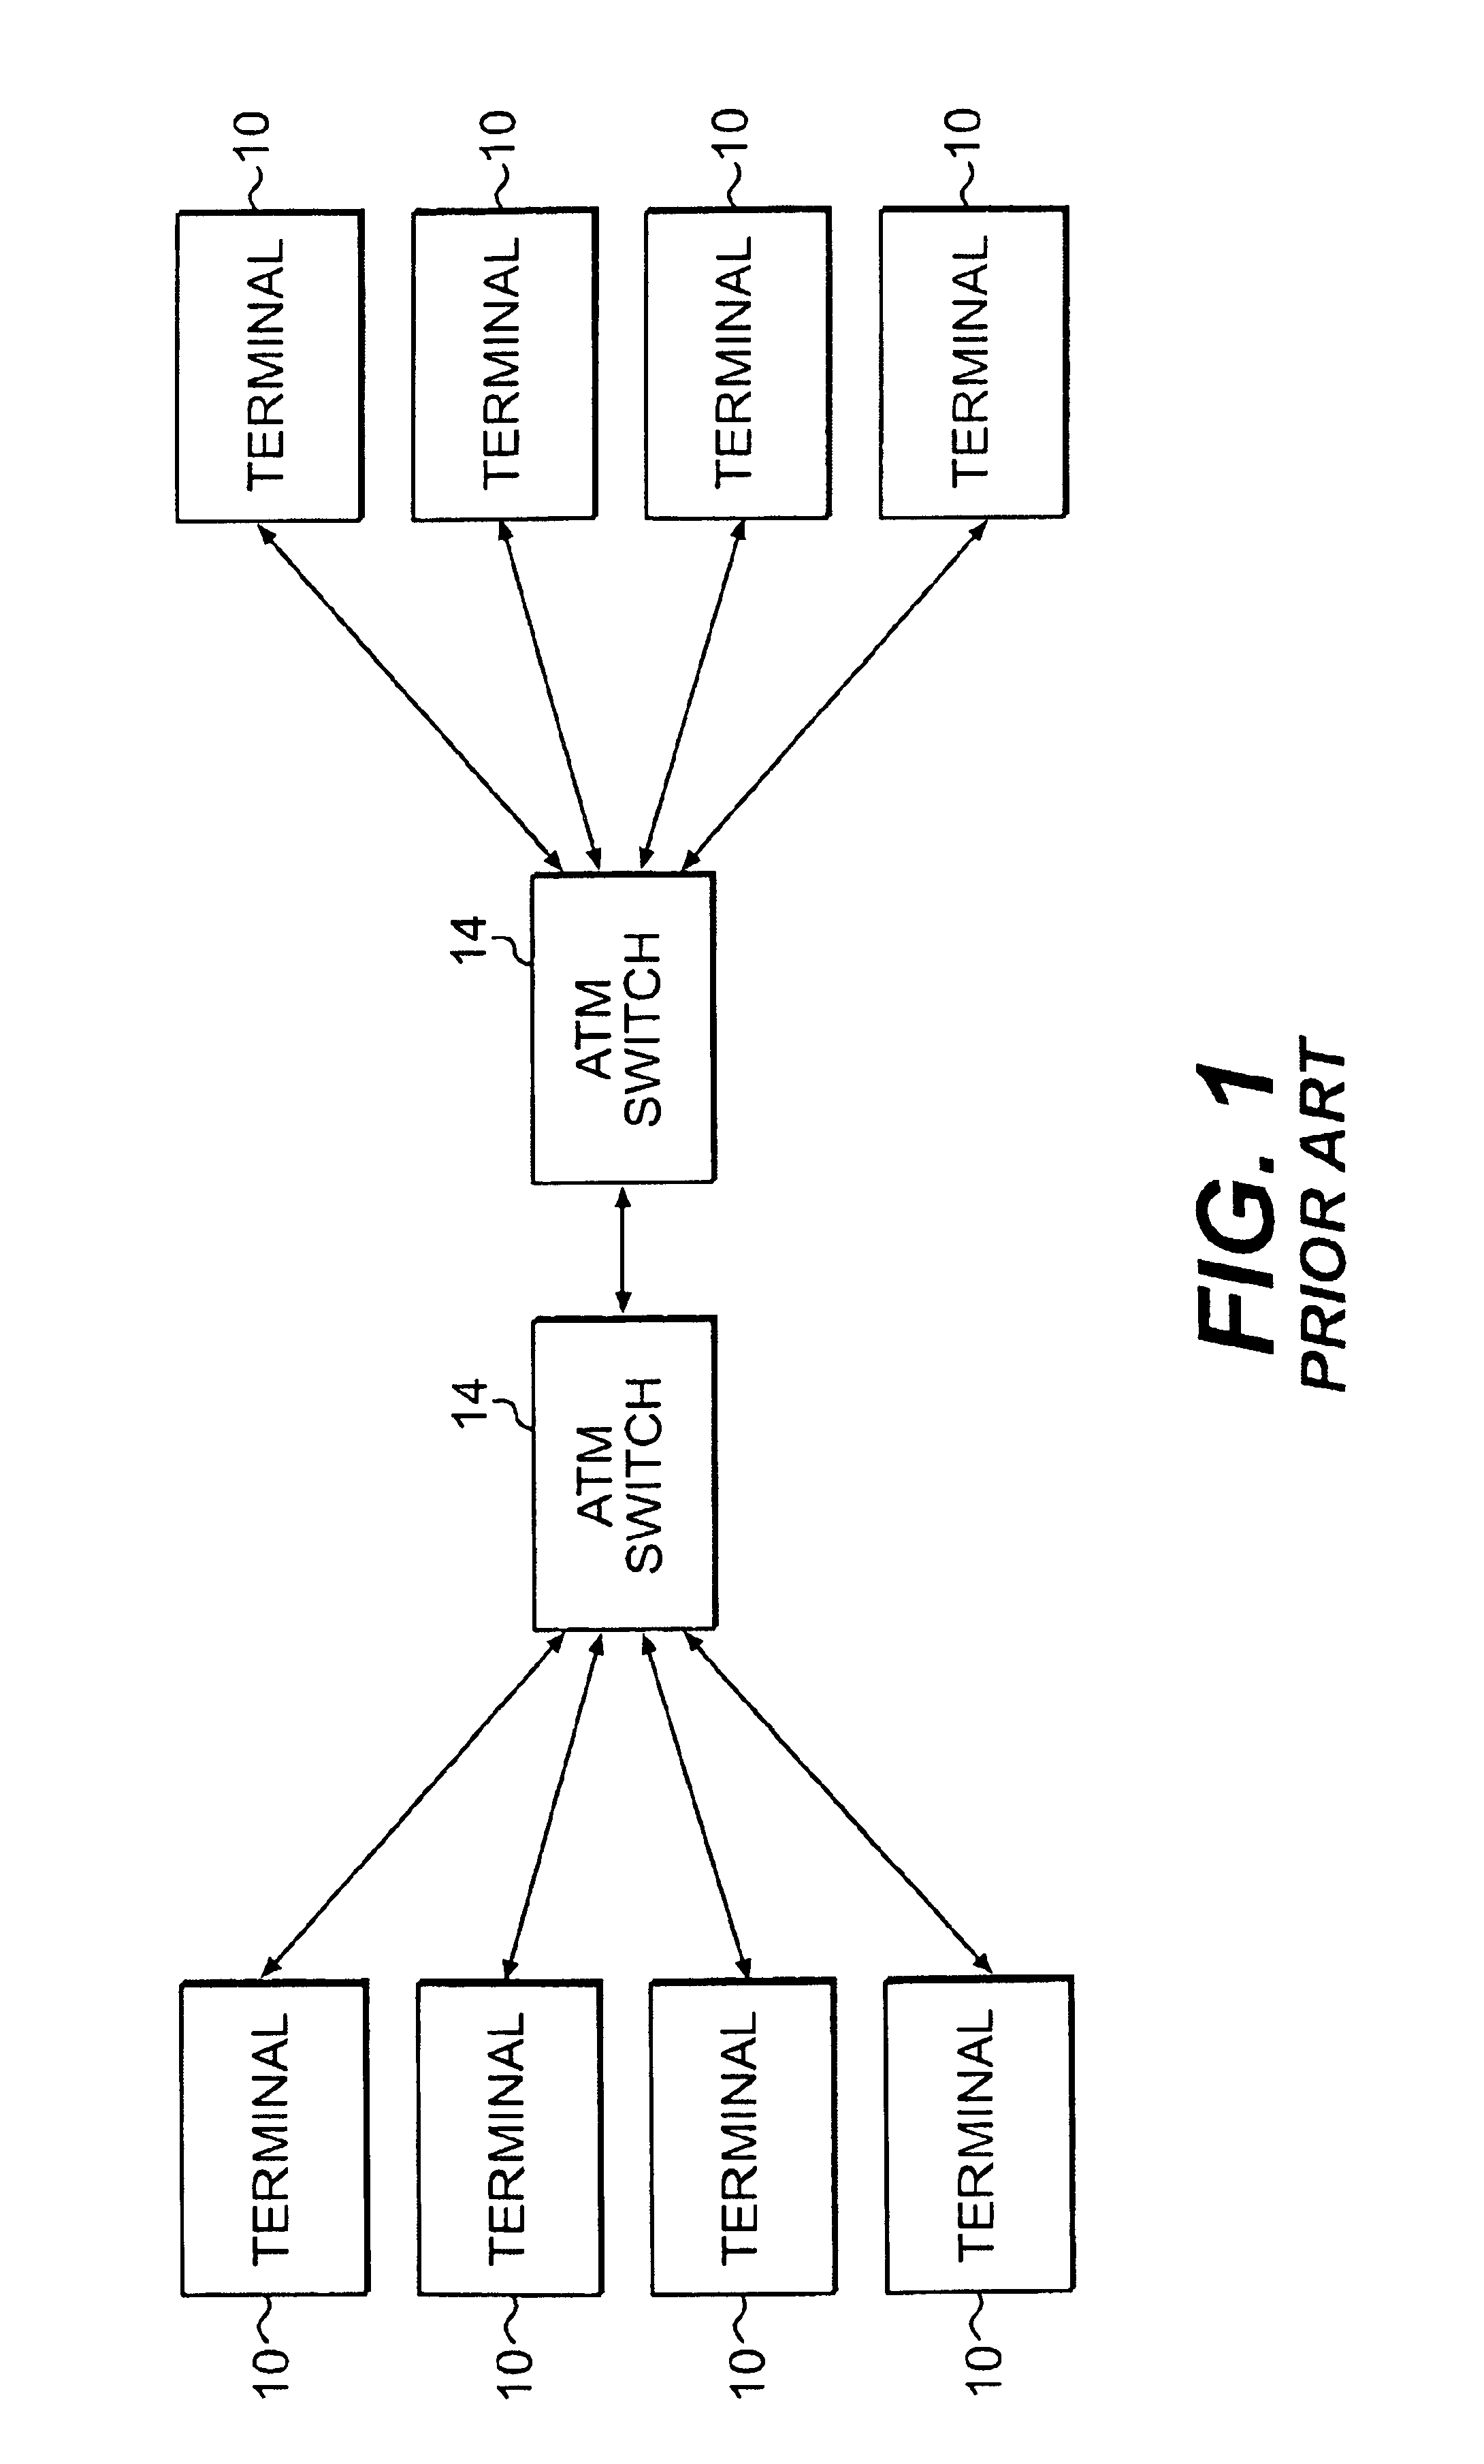 Distributed determination of explicit rate in an ATM communication system